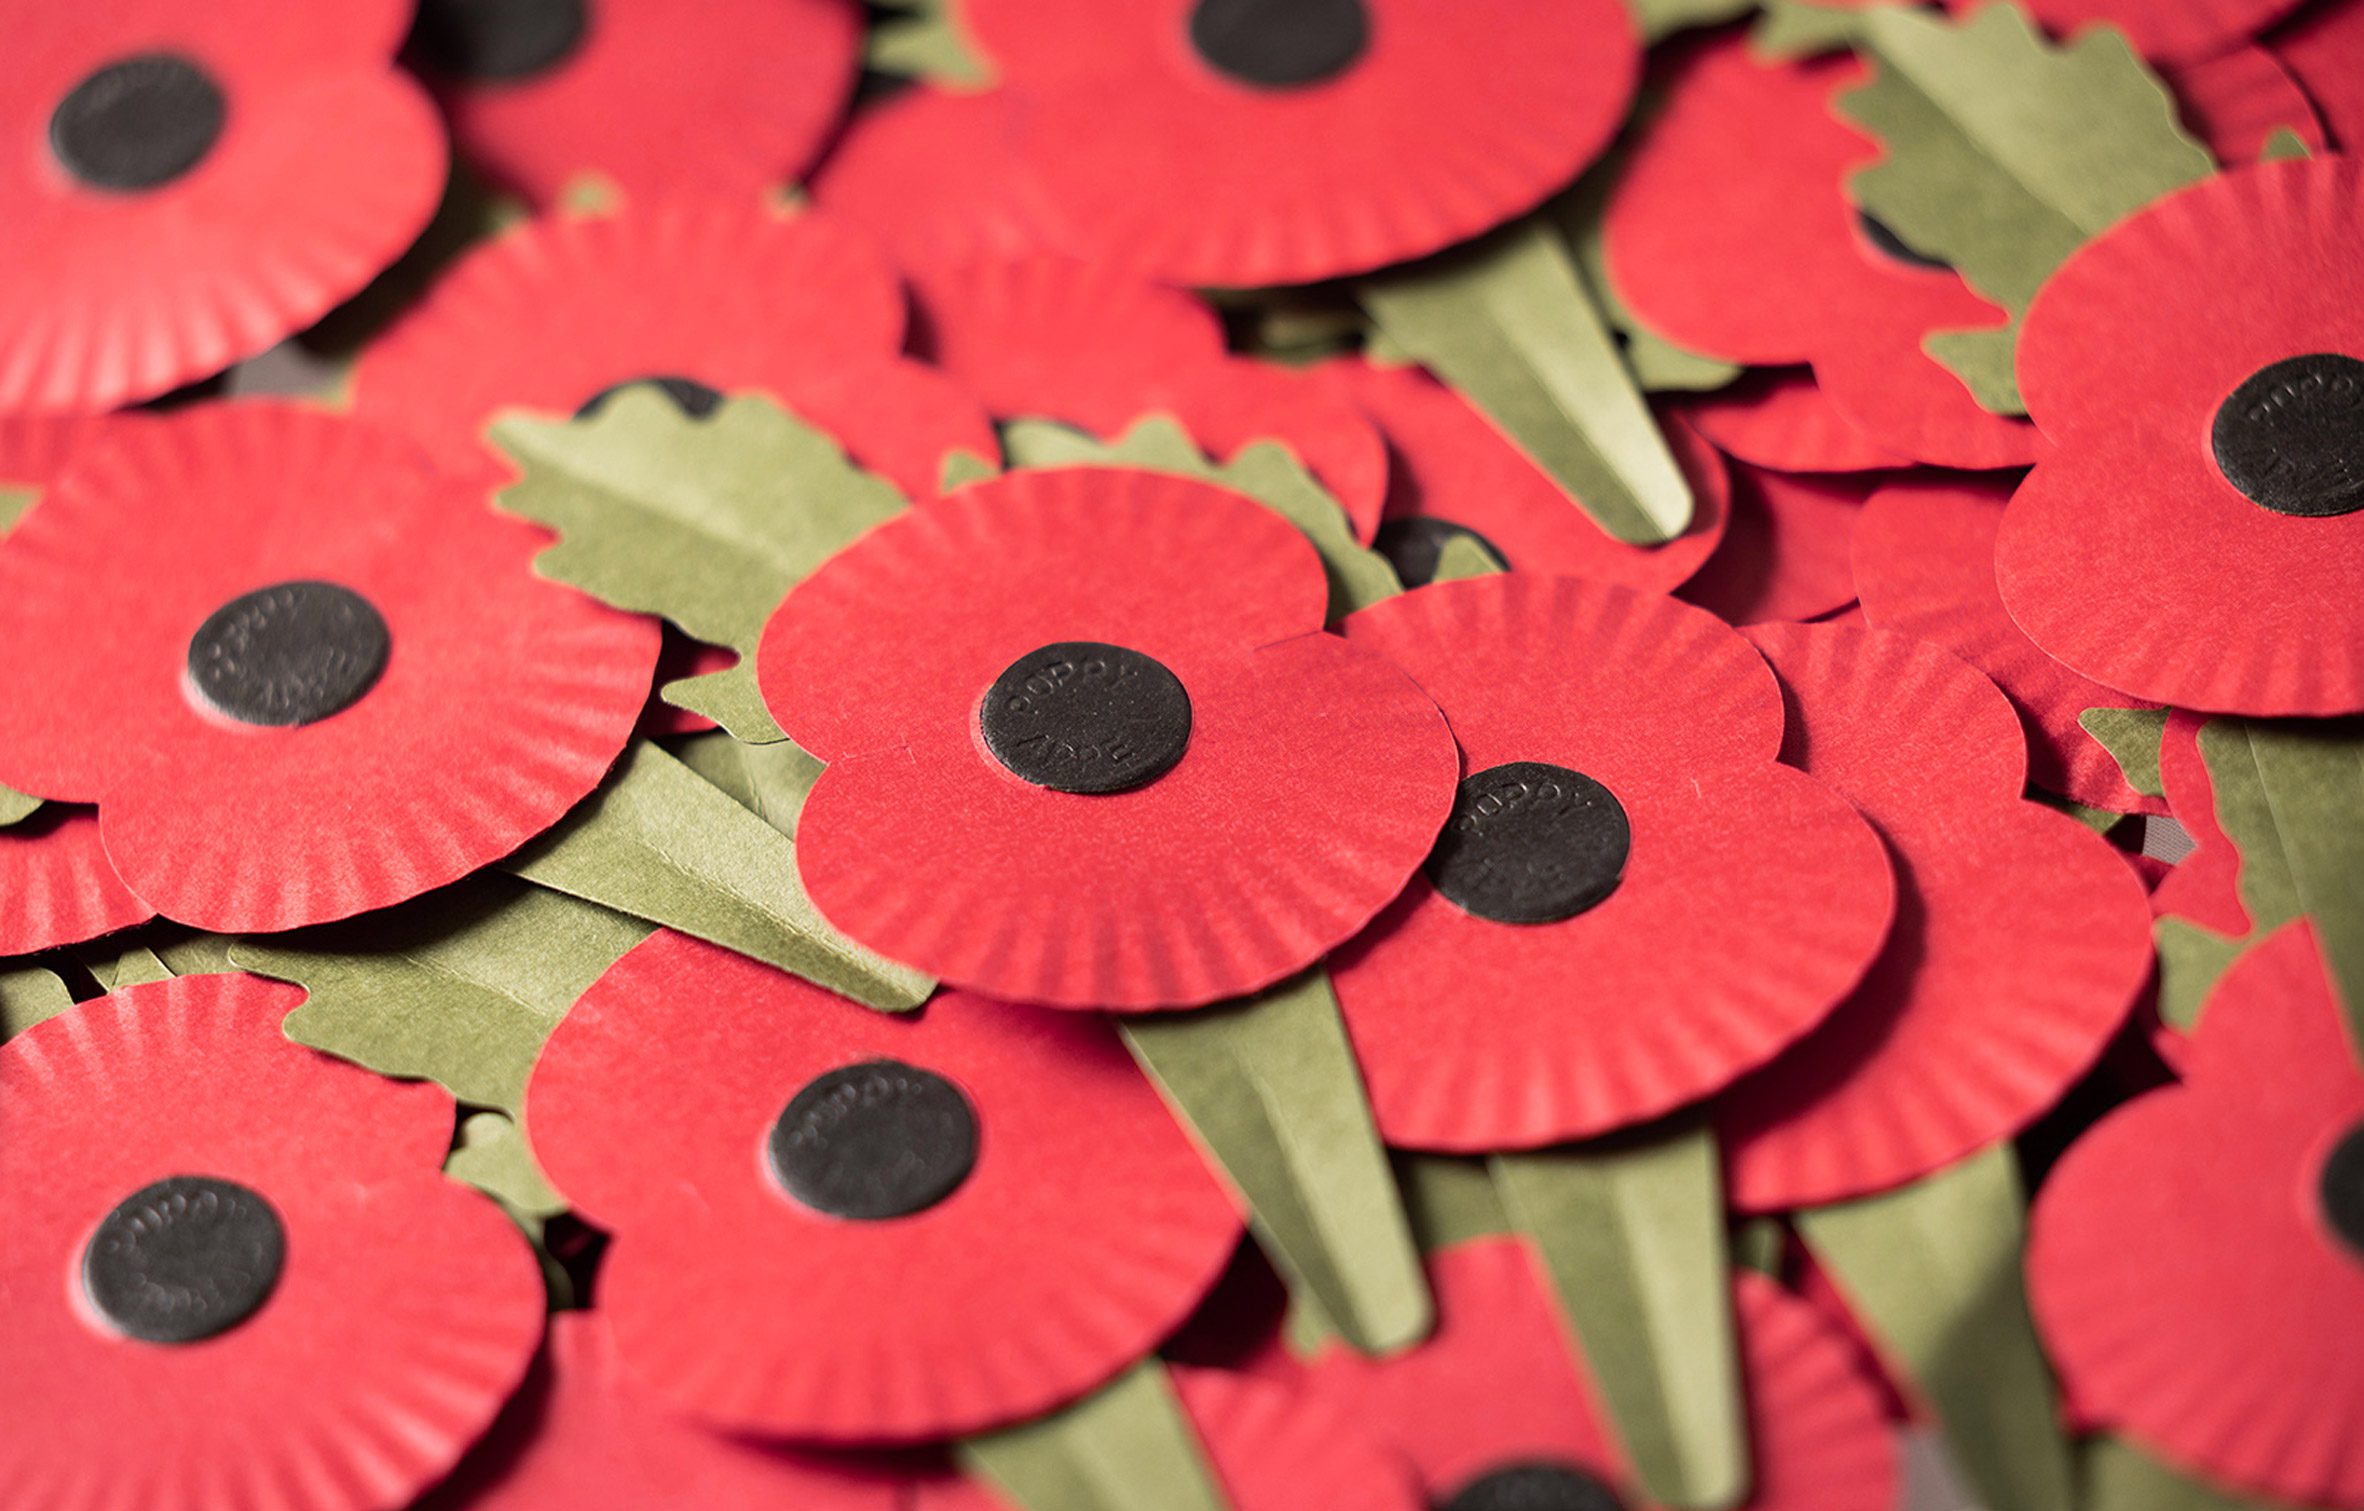 New Paper Poppies Available This Remembrance Day! - Two Sides